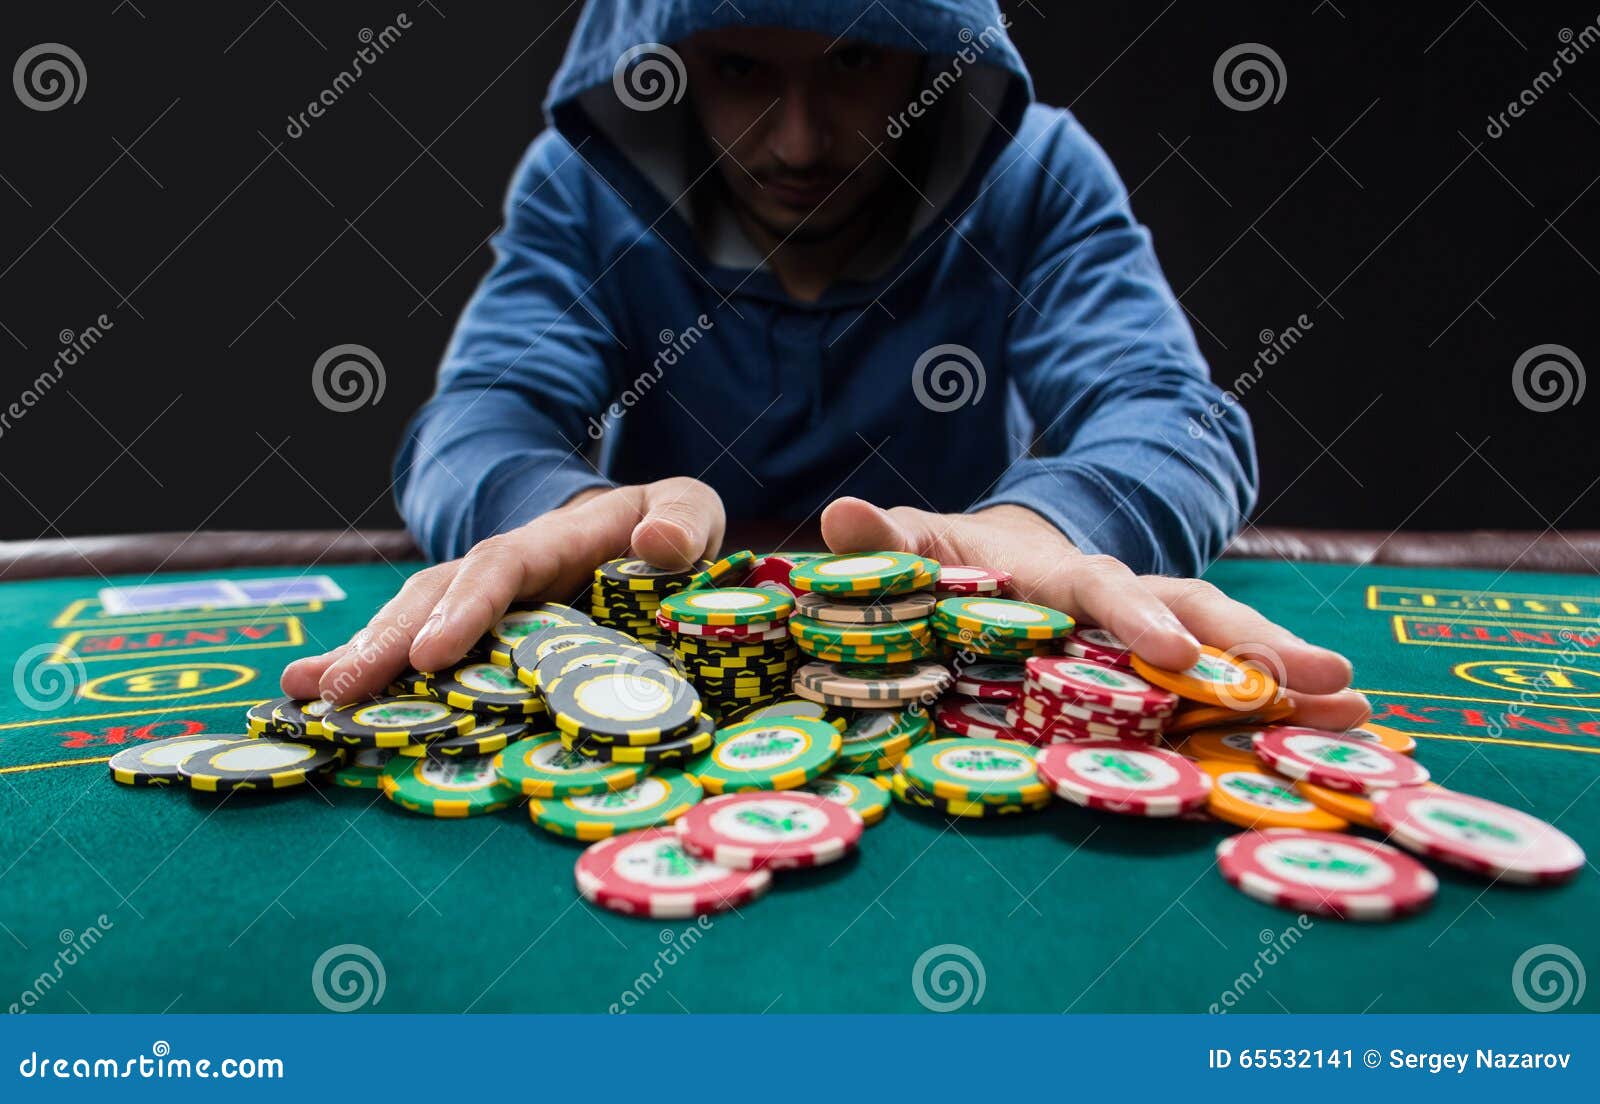 poker player going all in pushing his chips forward